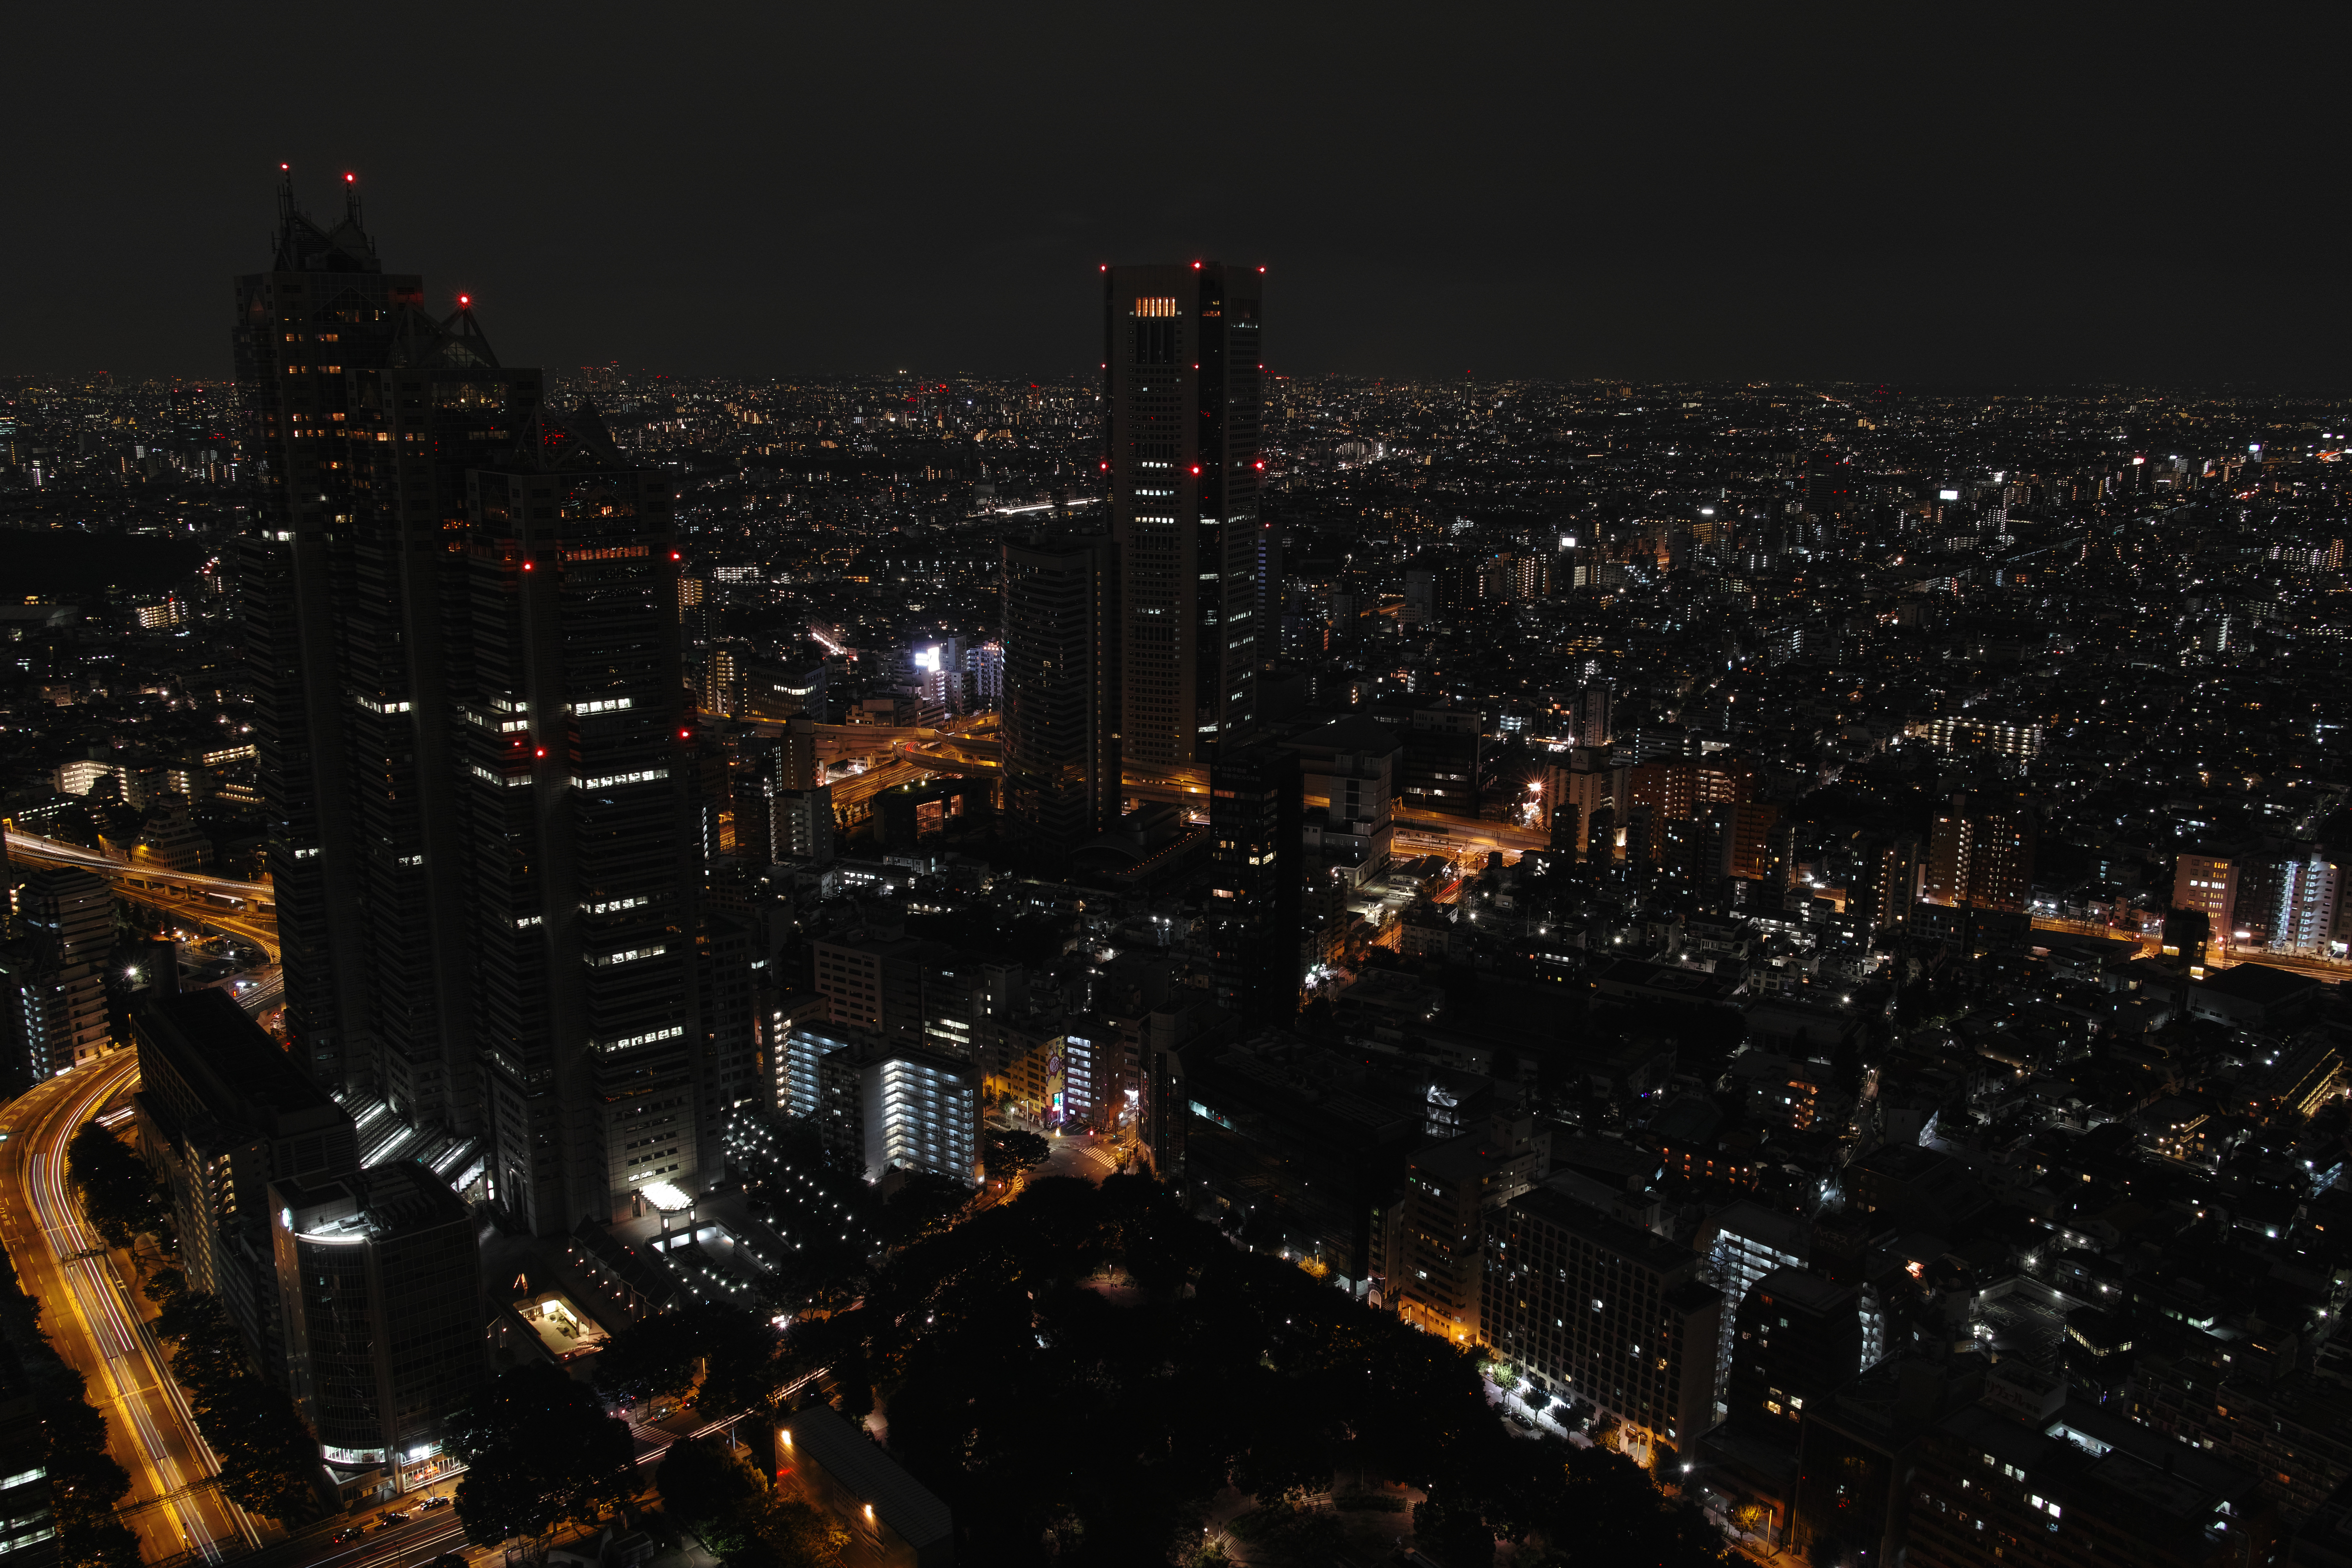 105041 download wallpaper night city, cities, night, skyscrapers, tokyo screensavers and pictures for free